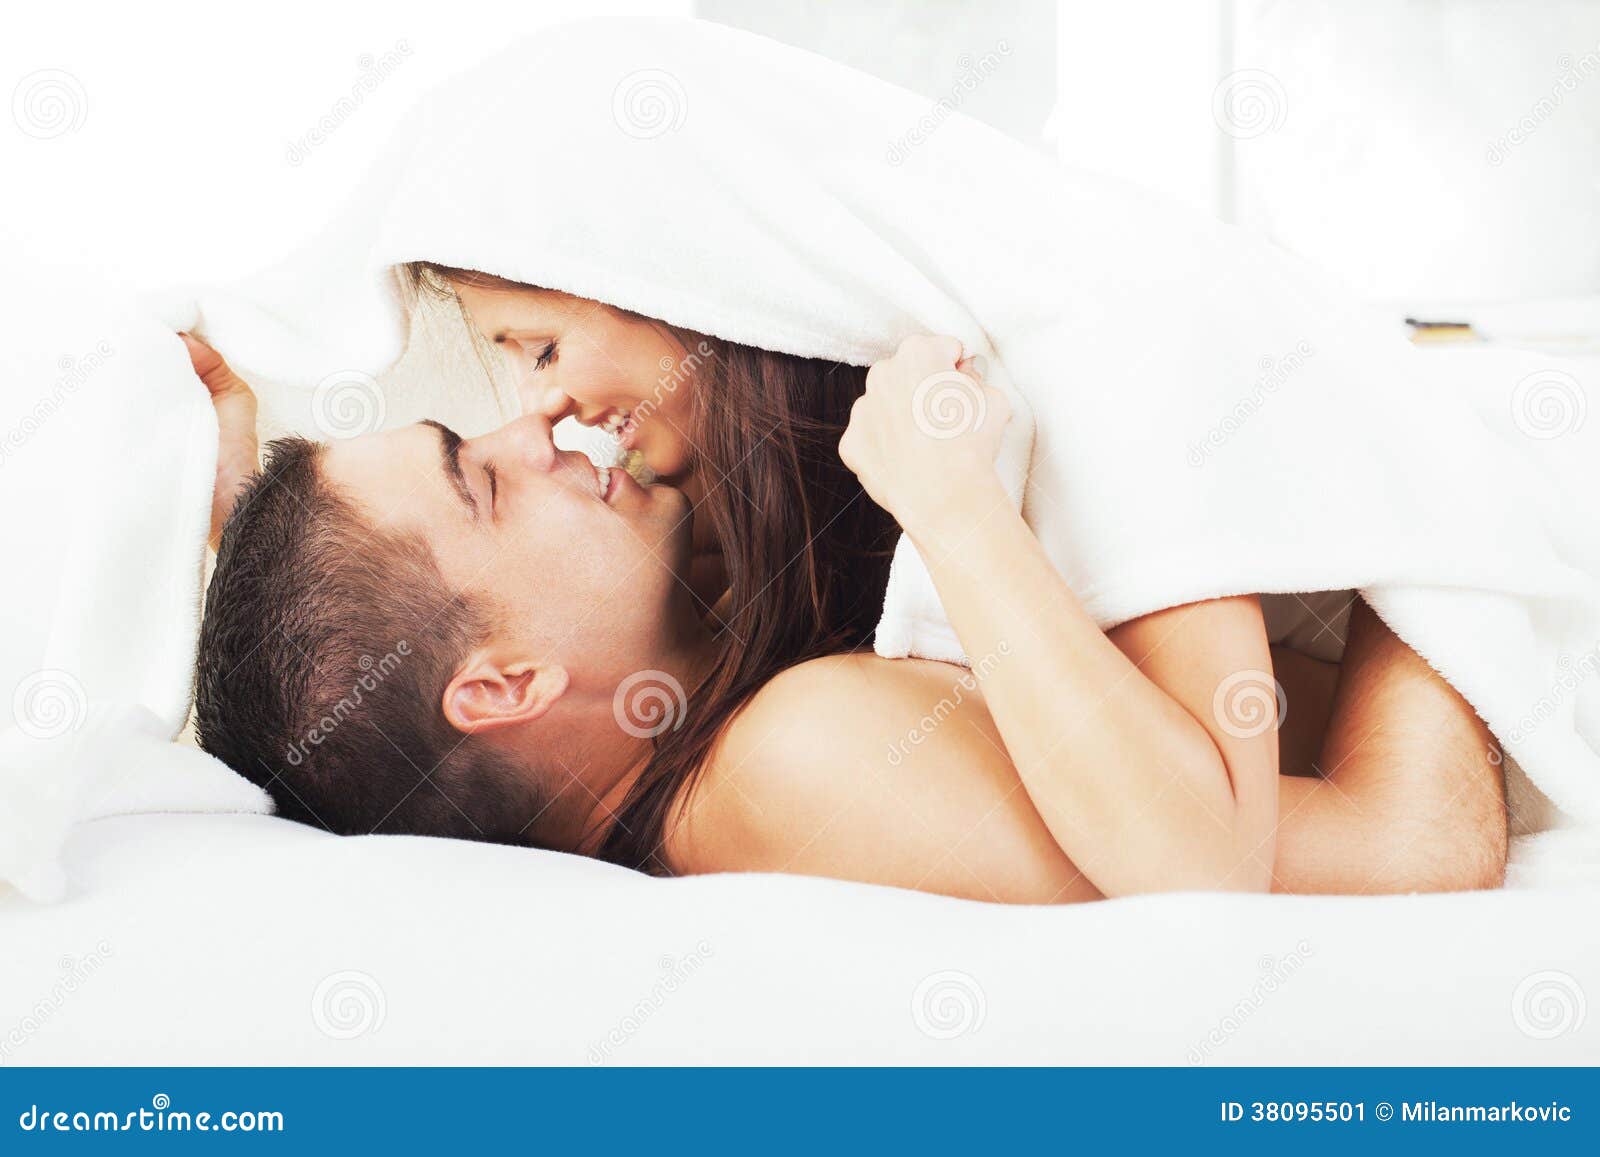 Romantic Couple in the Morning Stock Image - Image of horizontal ...